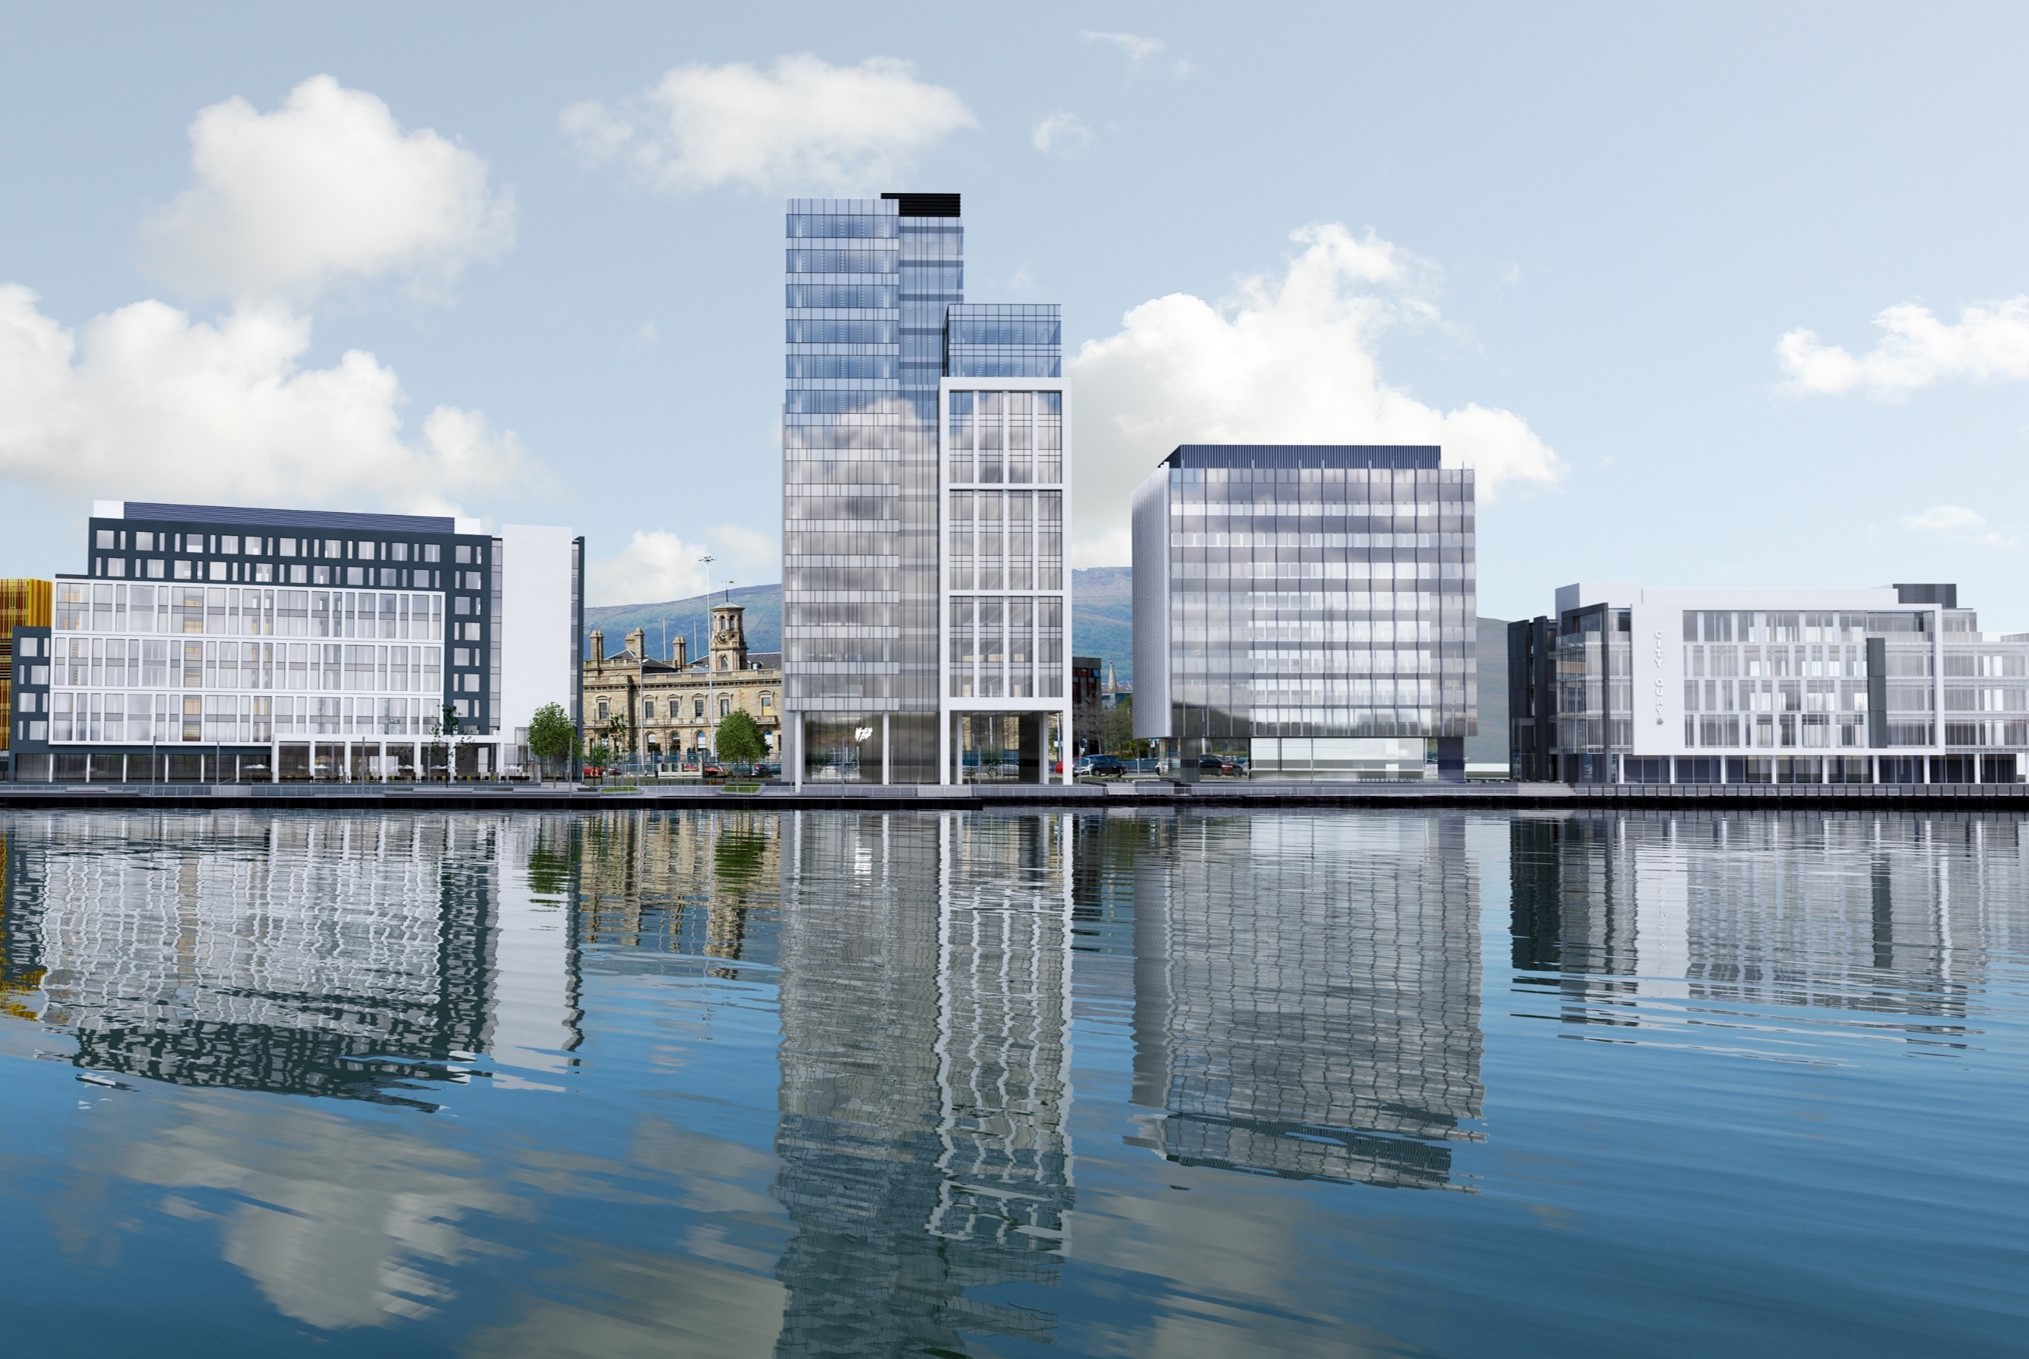 Planning Application Lodged For City Quays 3